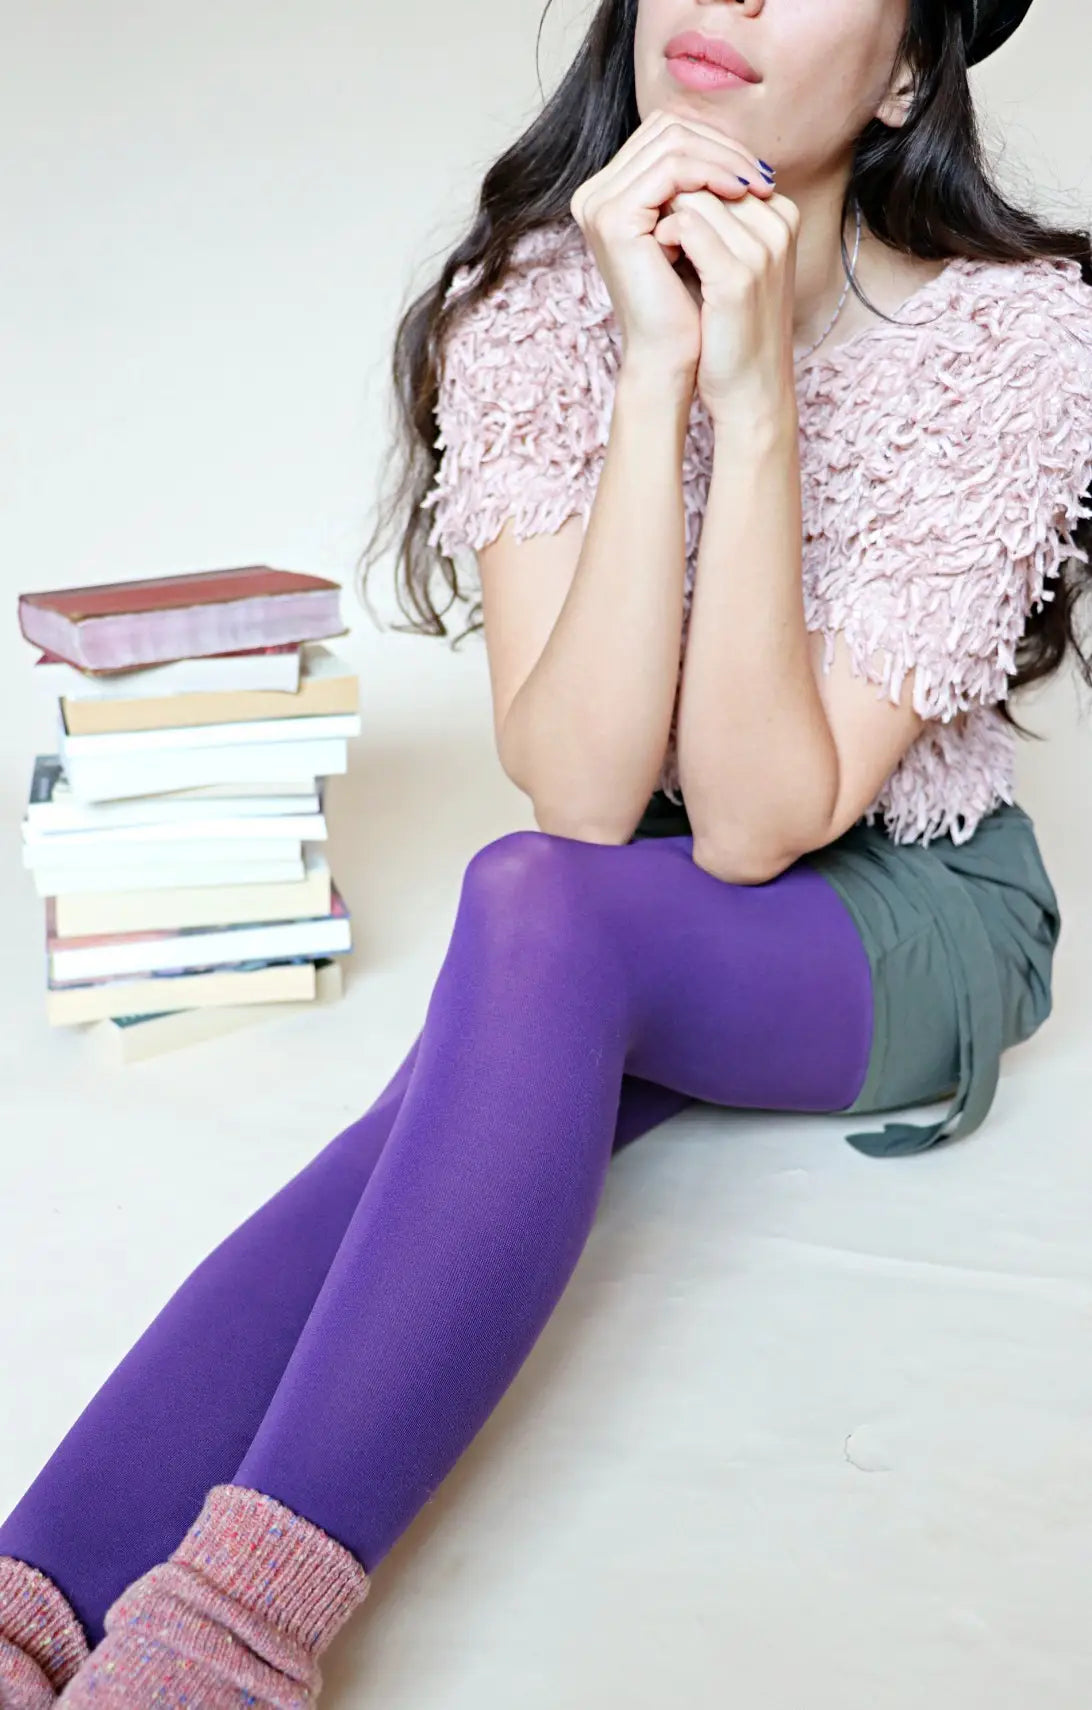 Colored Hosiery - The Boldest Bright coloured tights and more in